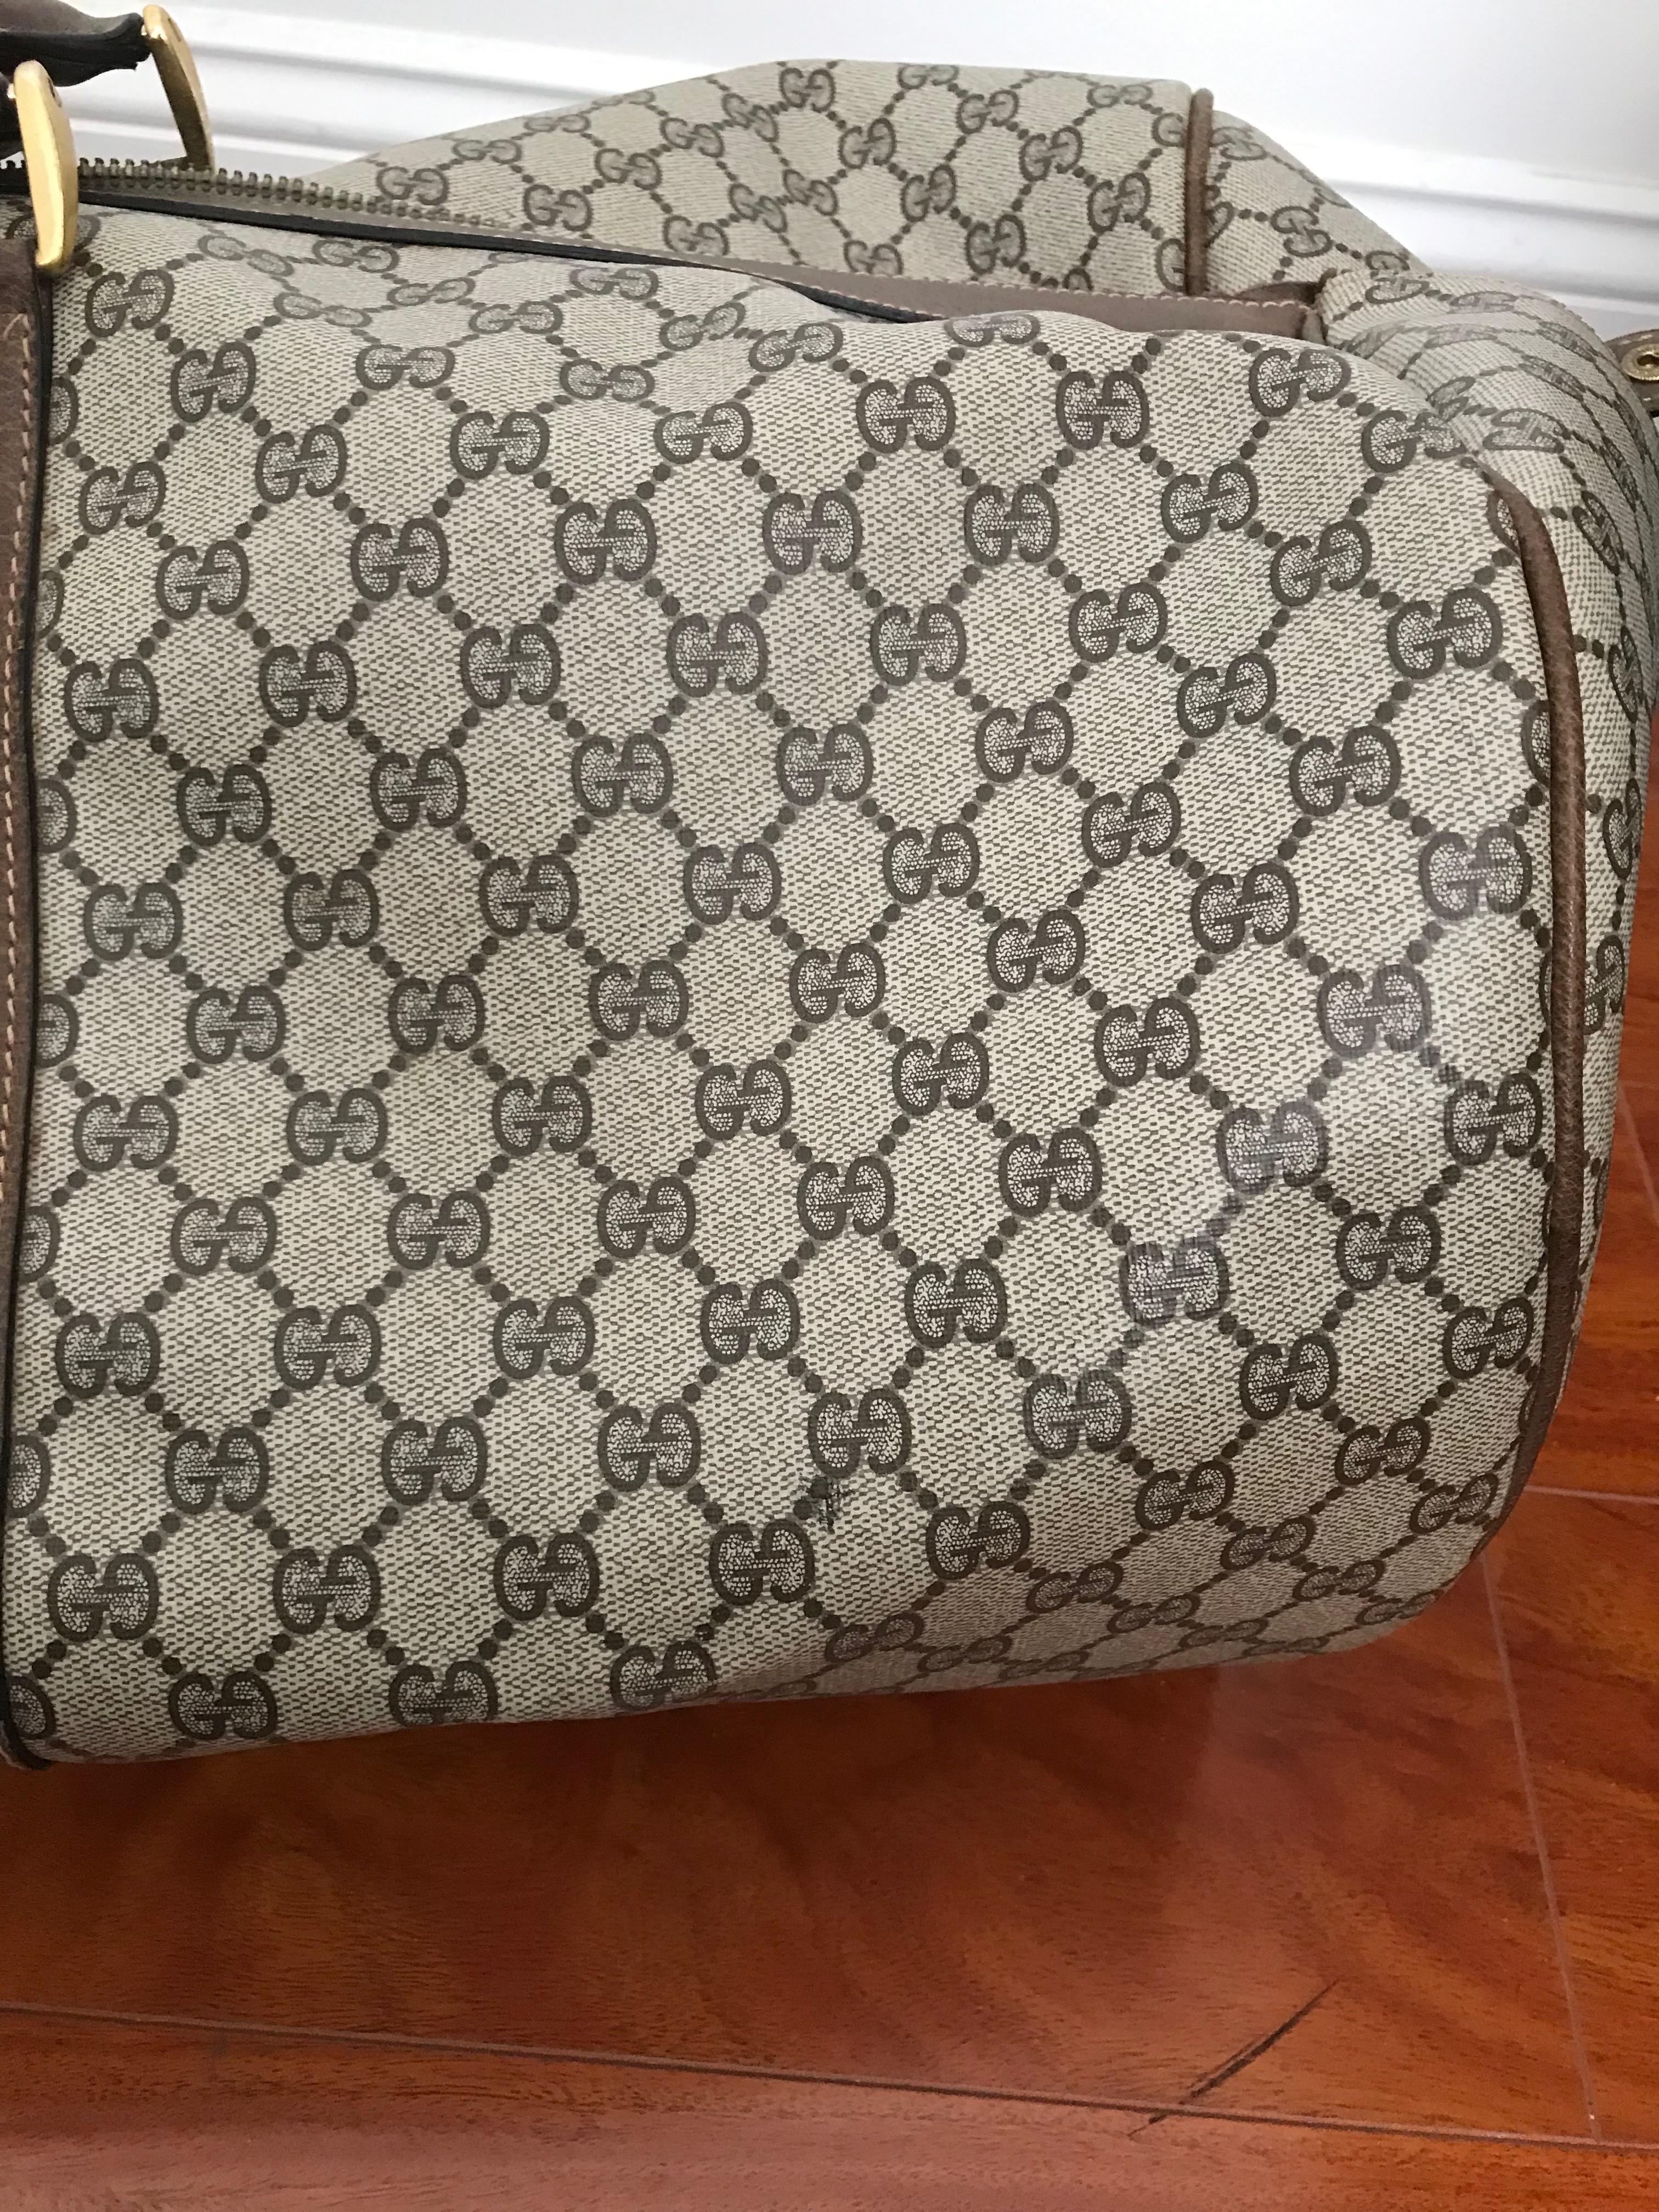 Huge vintage Gucci Duffel bag
Bag color: Monogram canvas brown
Material: Leather
Features: -Fully-zippered compartment -2 leather handles.
Hardware: Gold-tone.